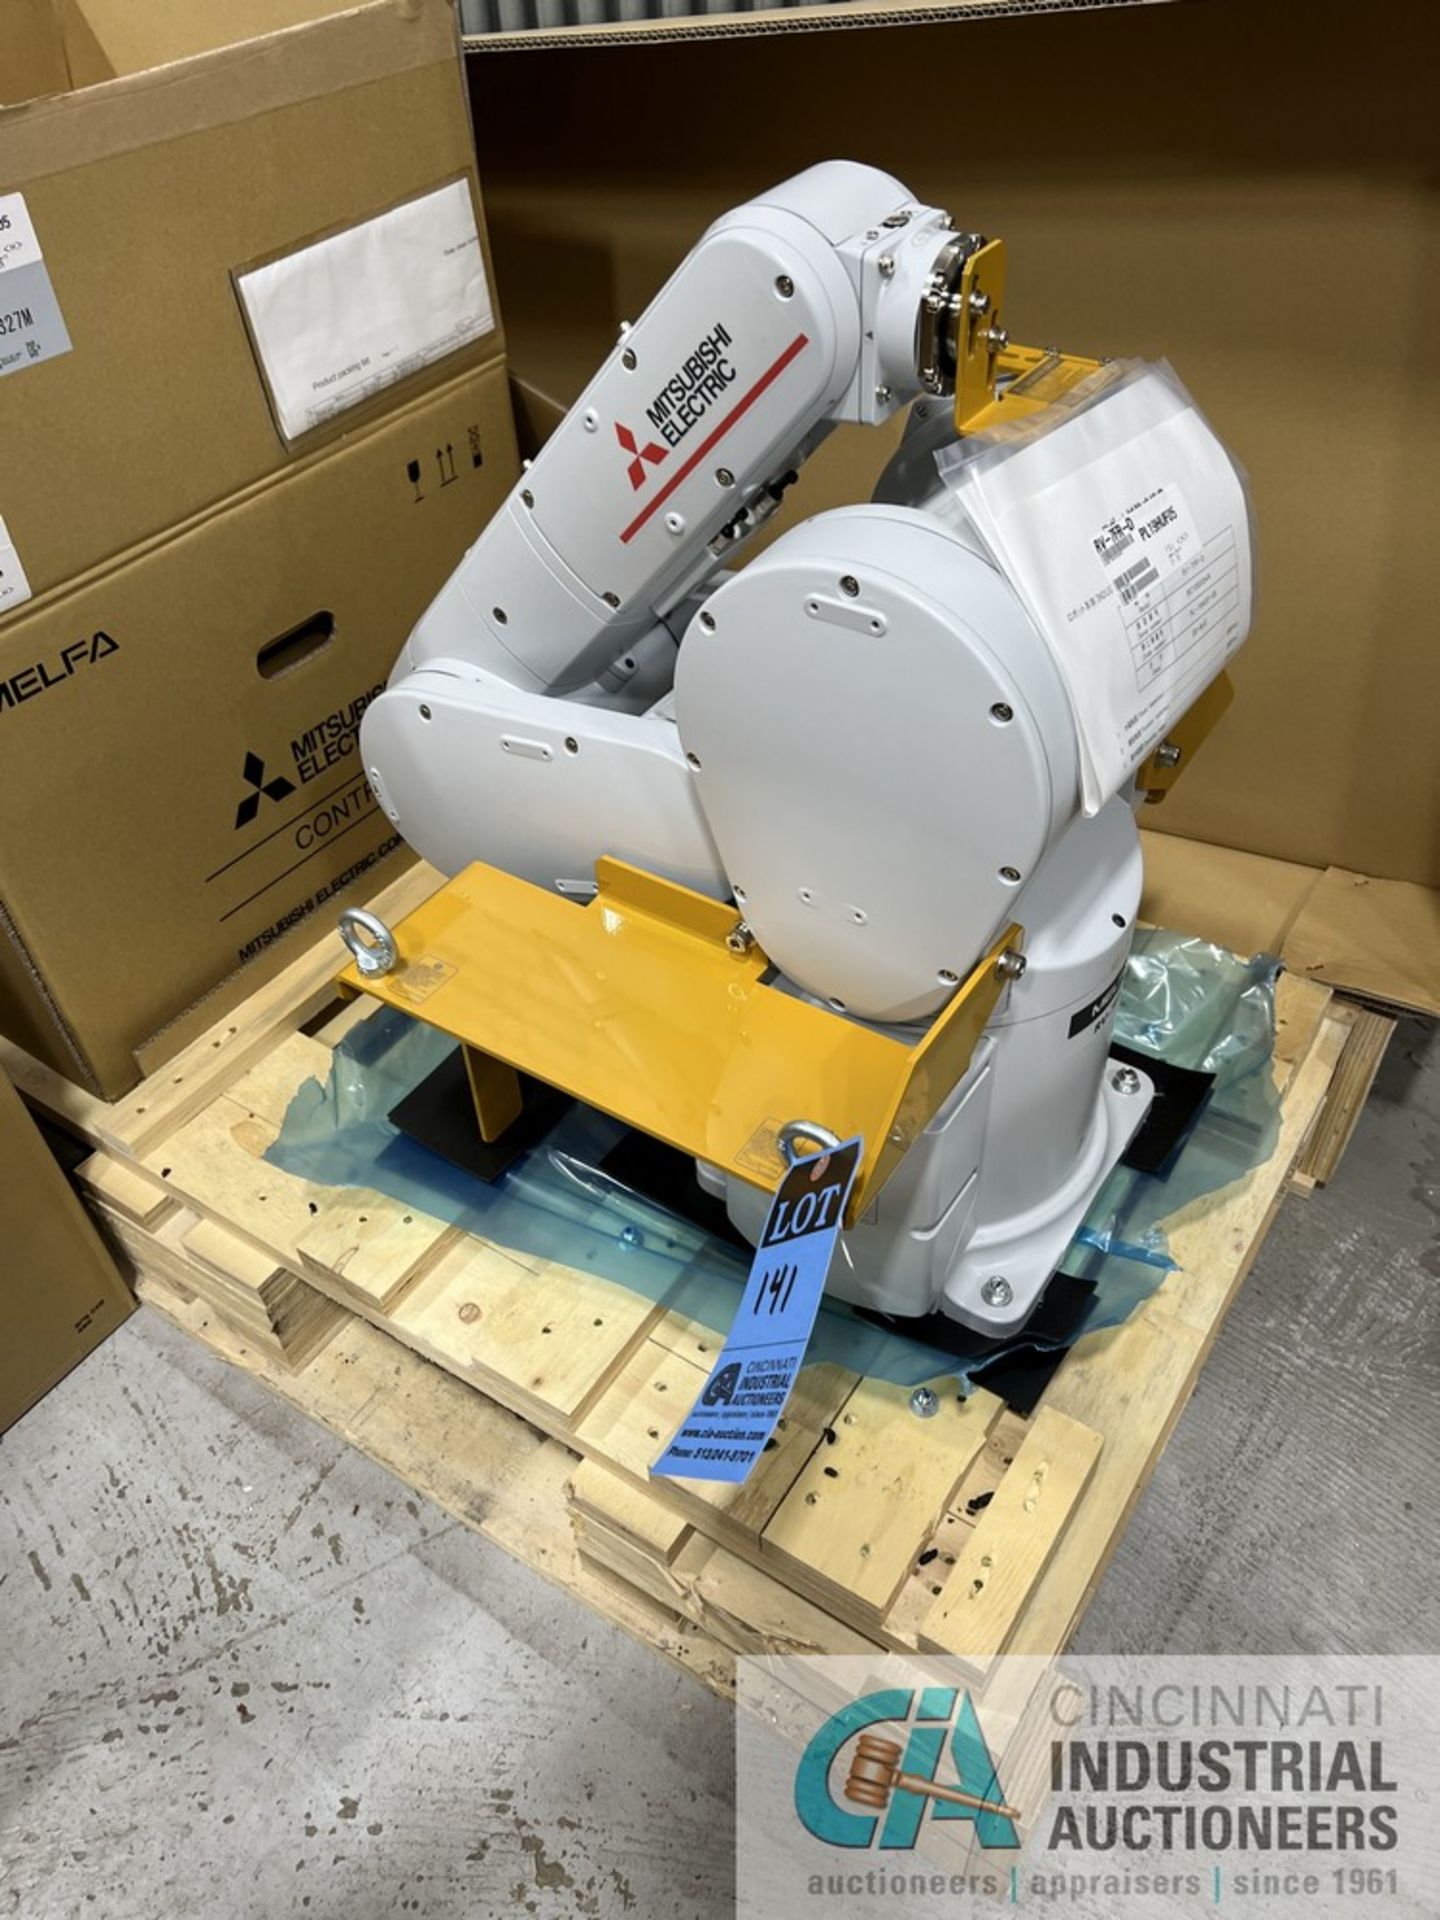 7 KG MITSUBISHI MODEL RV7FRD 6-AXIS ROBOT; S/N BC1050054R, CR800-07VD CONTROLLER, R32TB PENDANT, - Image 2 of 10